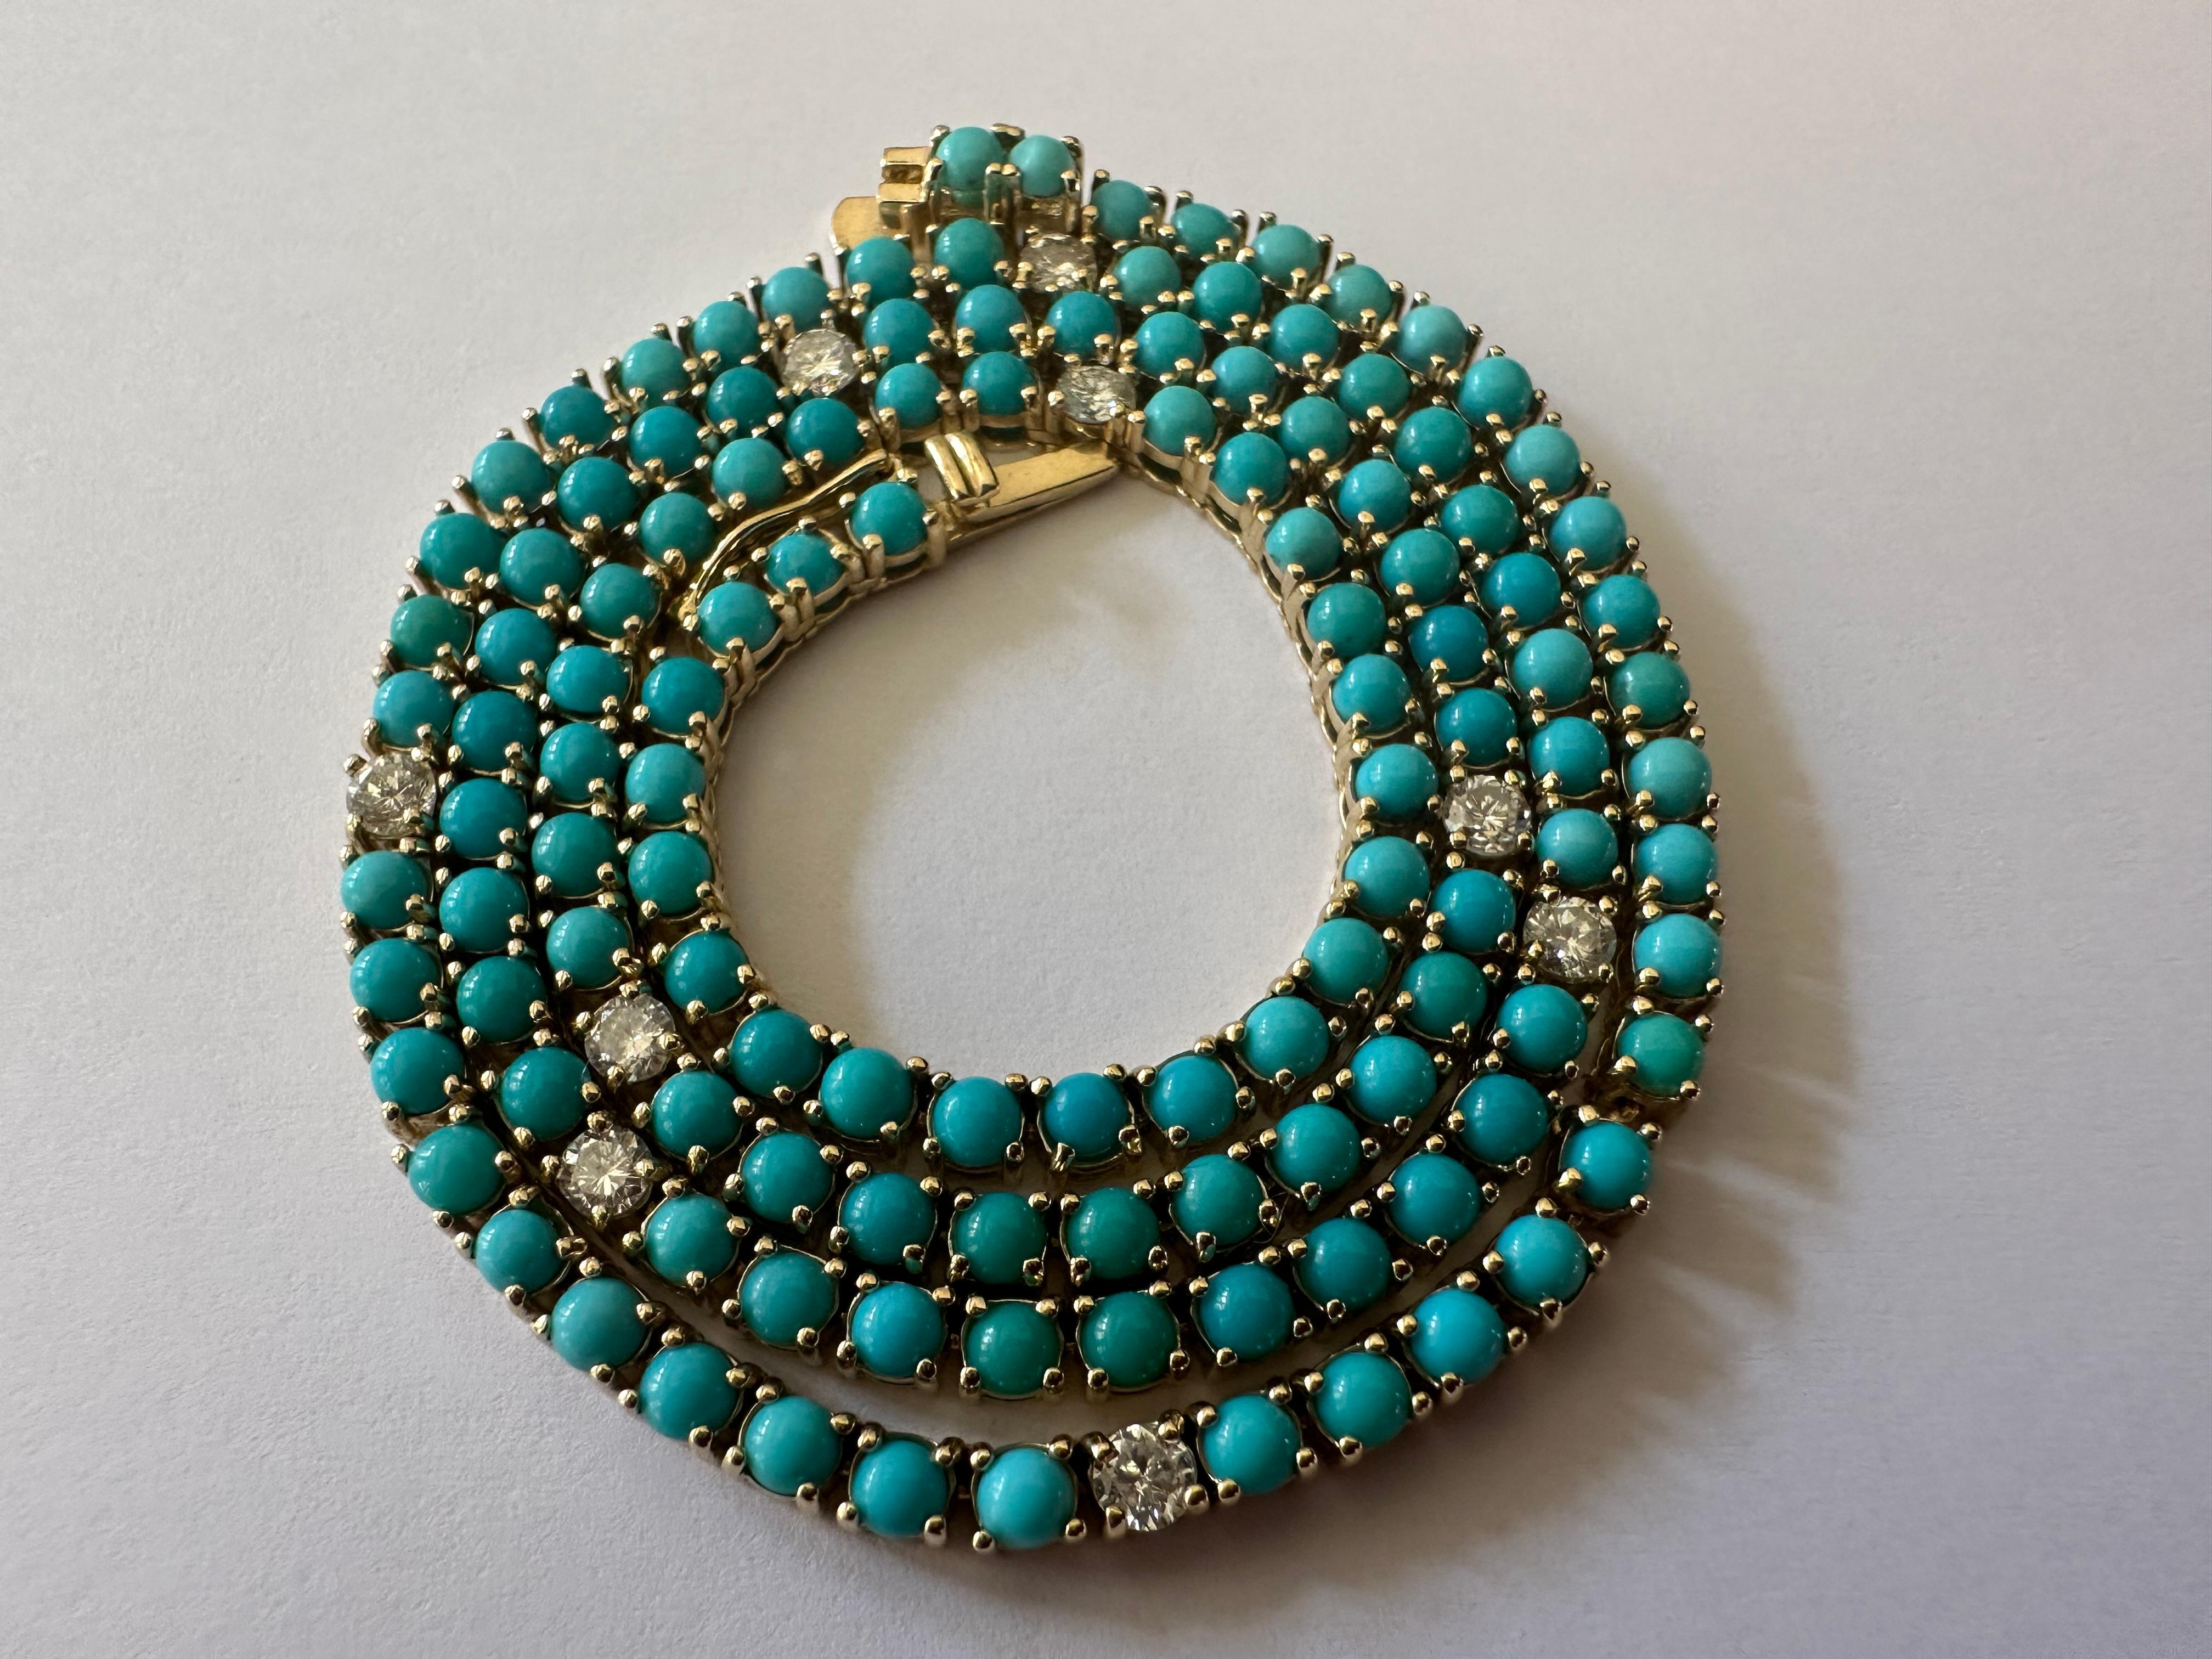 This exquisite tennis necklace set in 14K yellow gold features one hundred twenty-two natural fine turquoise round-shaped cabochons-- all hand cut to match-- interspersed with nine natural round brilliant-cut diamonds totaling 0.89 carats, F-G